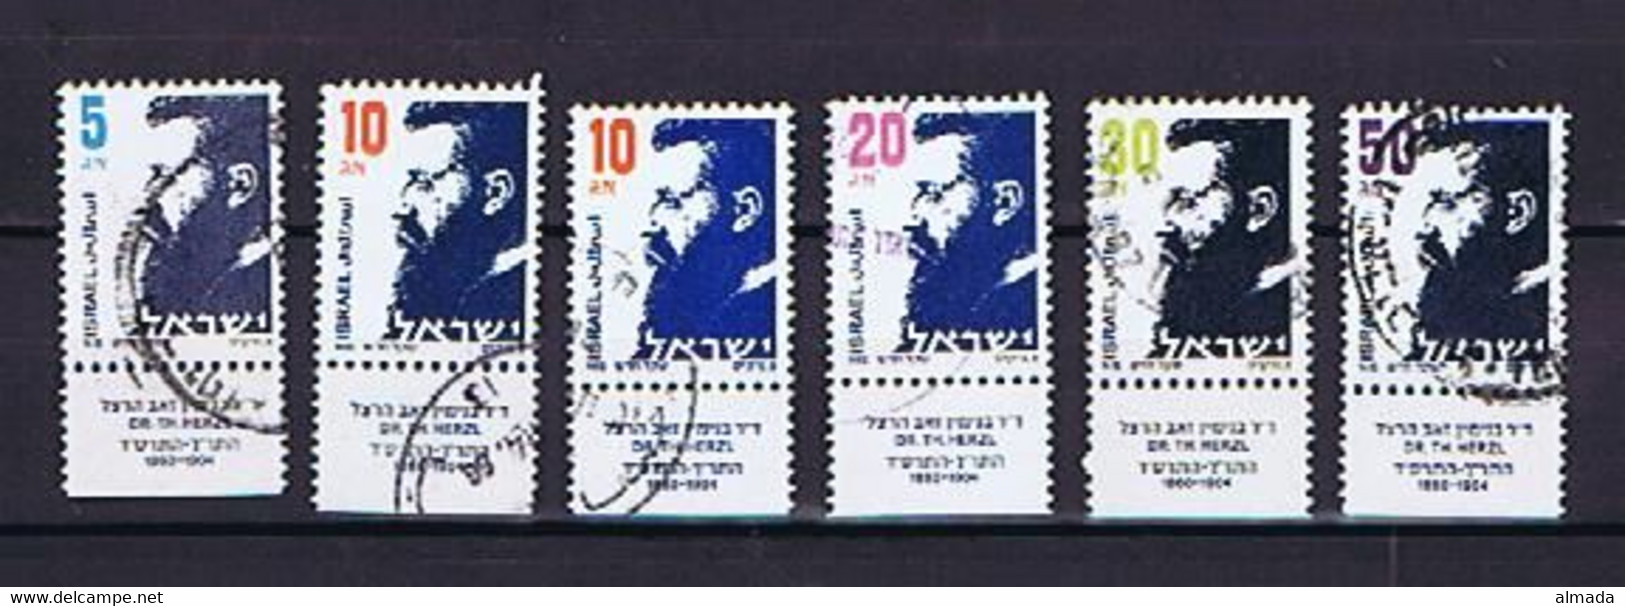 Israel 1986: Mi.-Nr. 1019-1023 Used / Gestempelt With TABs (see Description) - Used Stamps (with Tabs)